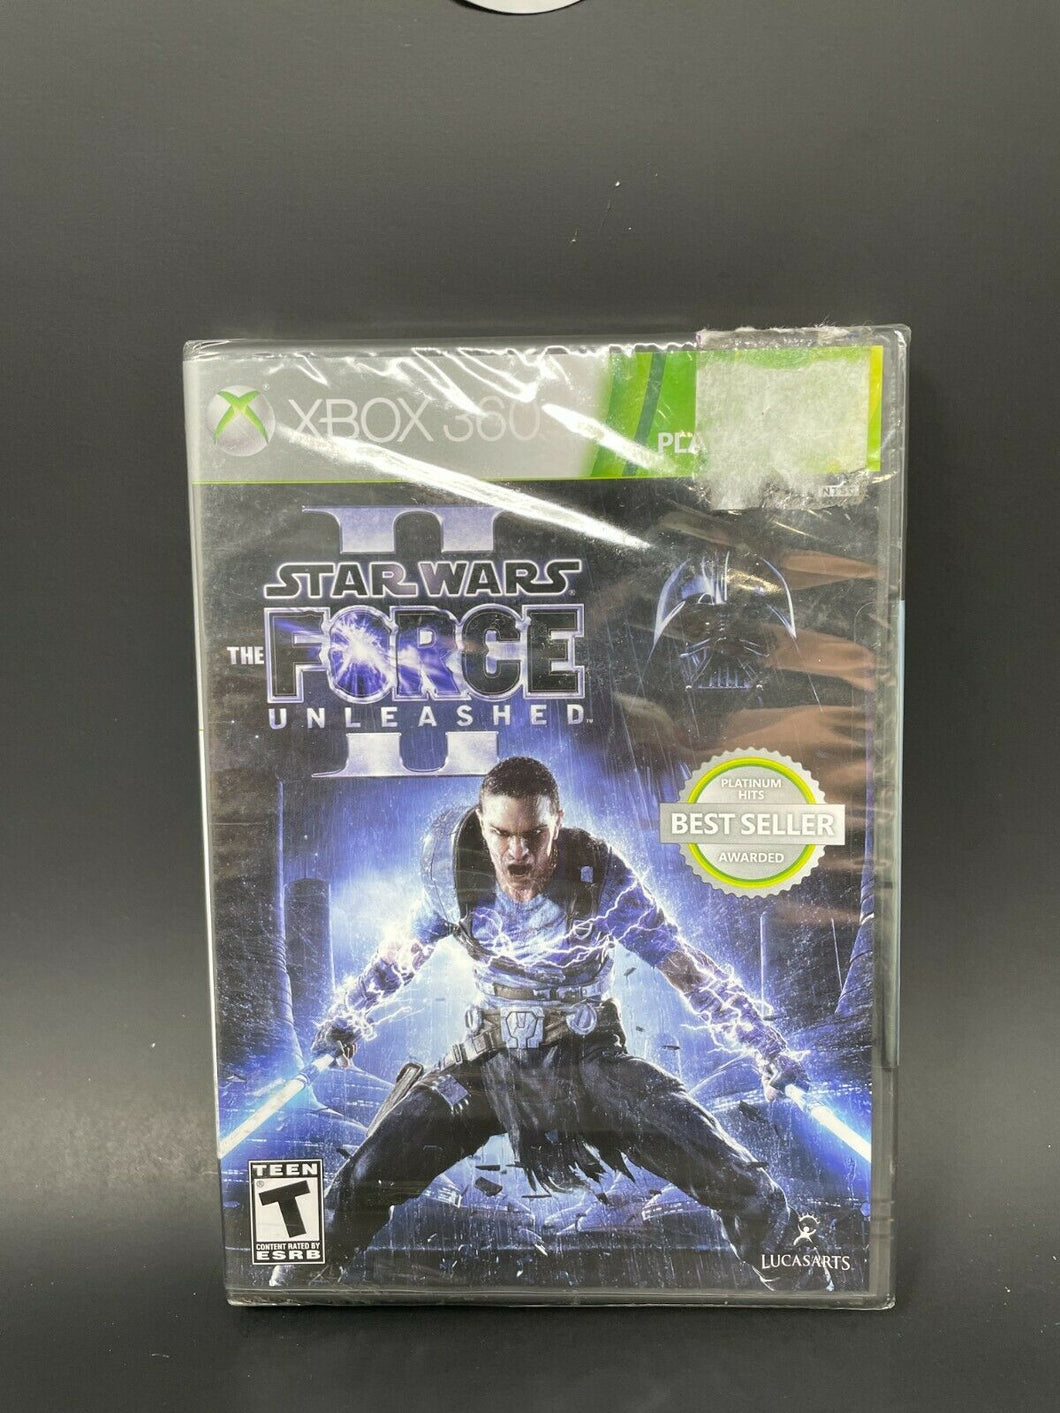 Star Wars: The Force Unleashed II Xbox 360 [Platinum Hits] (Brand New)